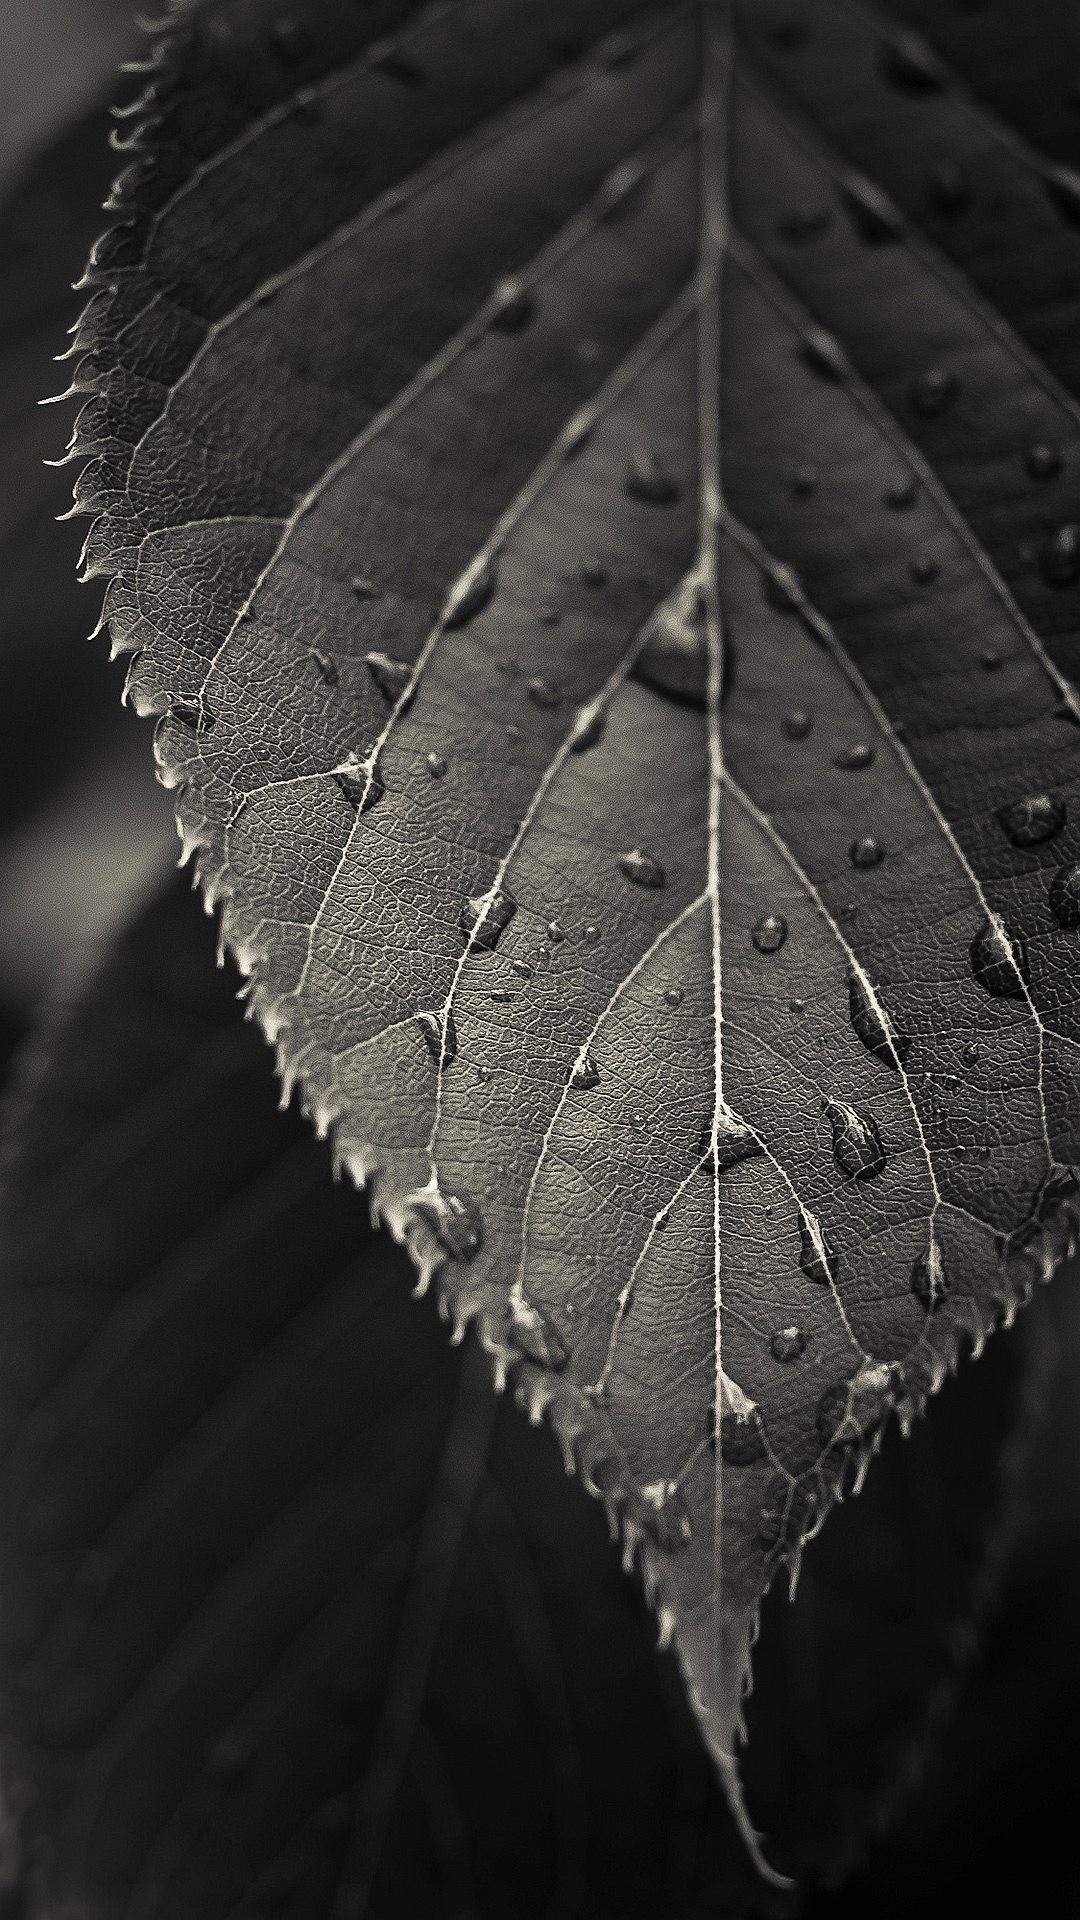 1080x1920 Nature iPhone 6 Plus Wallpapers - Black And White Close-up Leaf Dew Drops  iPhone 6 Plus HD Wallpaper